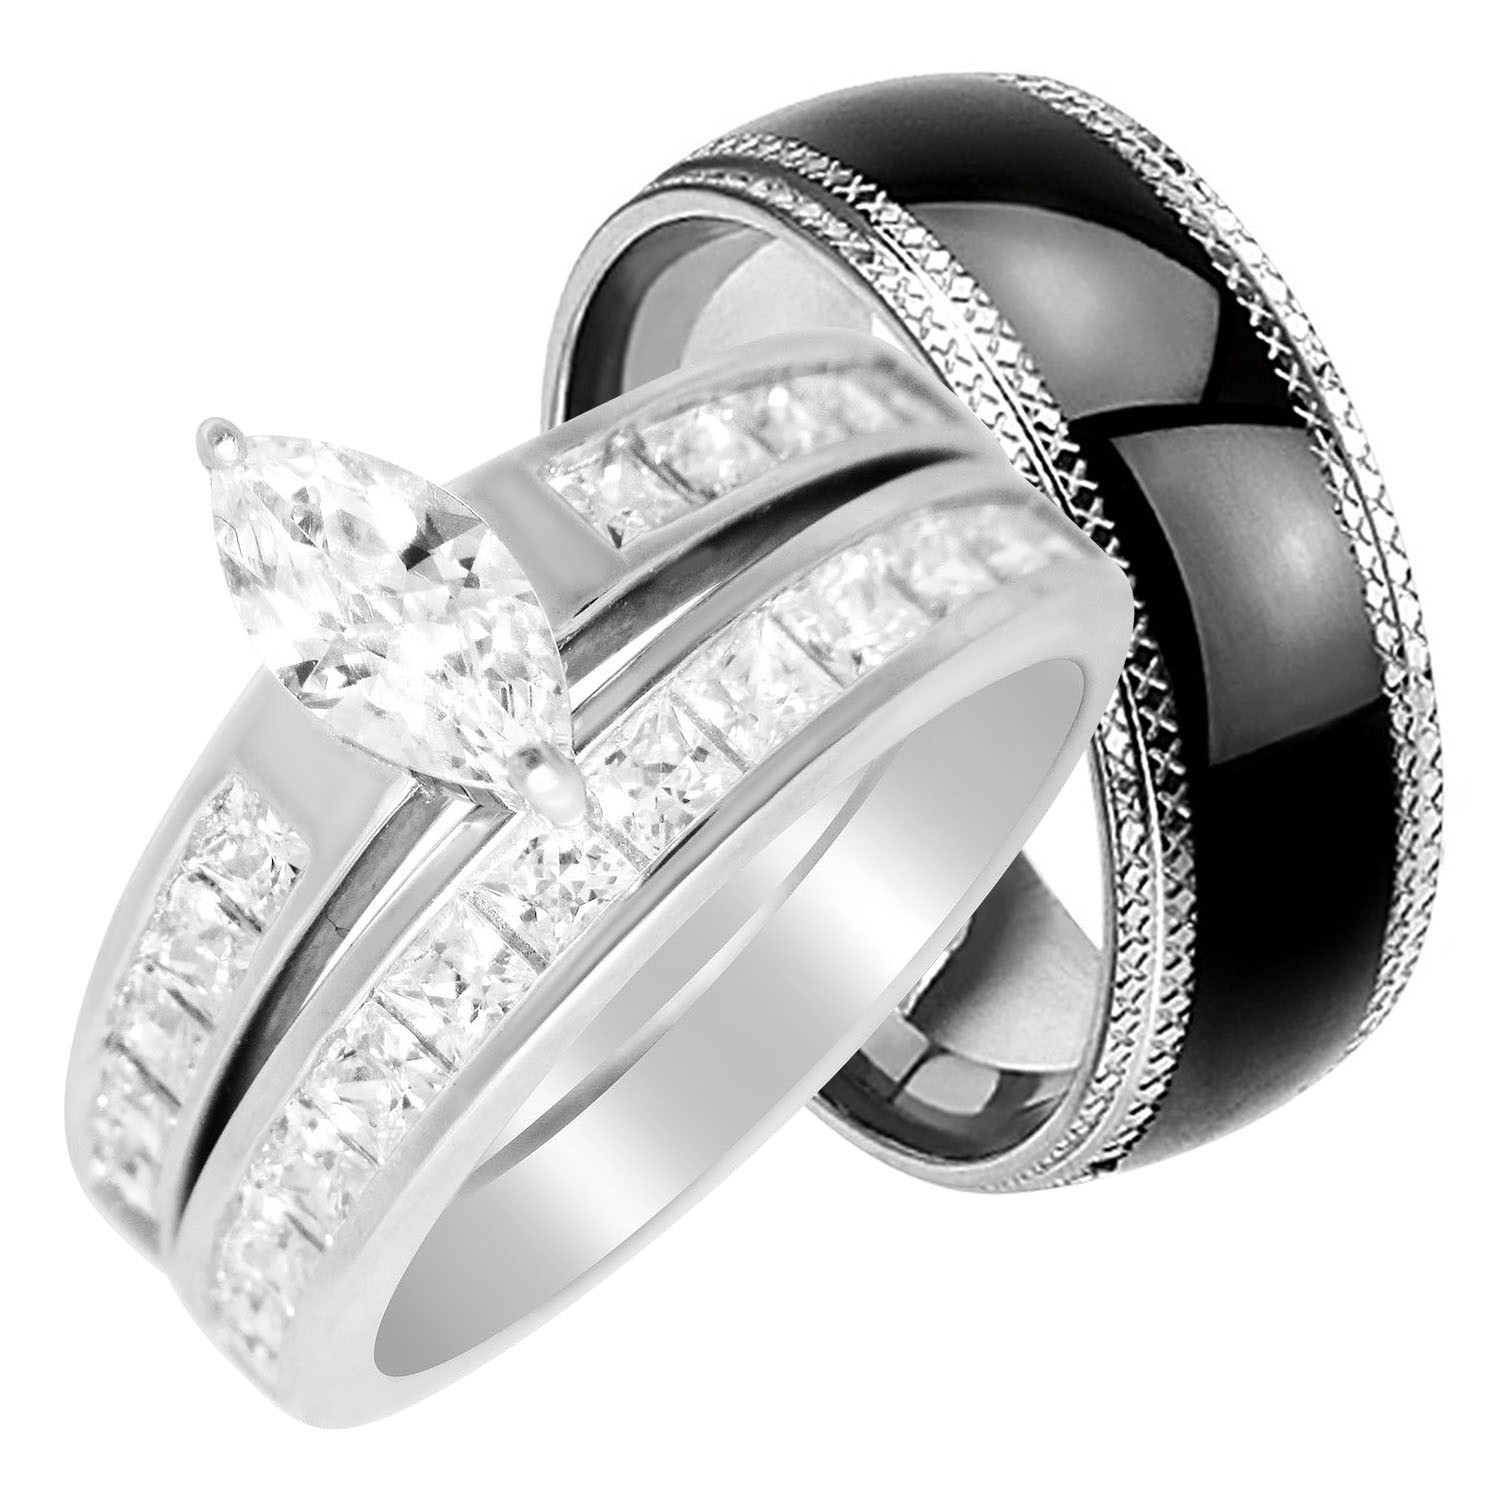 Cheap Wedding Rings For Him
 LaRaso & Co His Hers Wedding Rings Set Cheap Matching